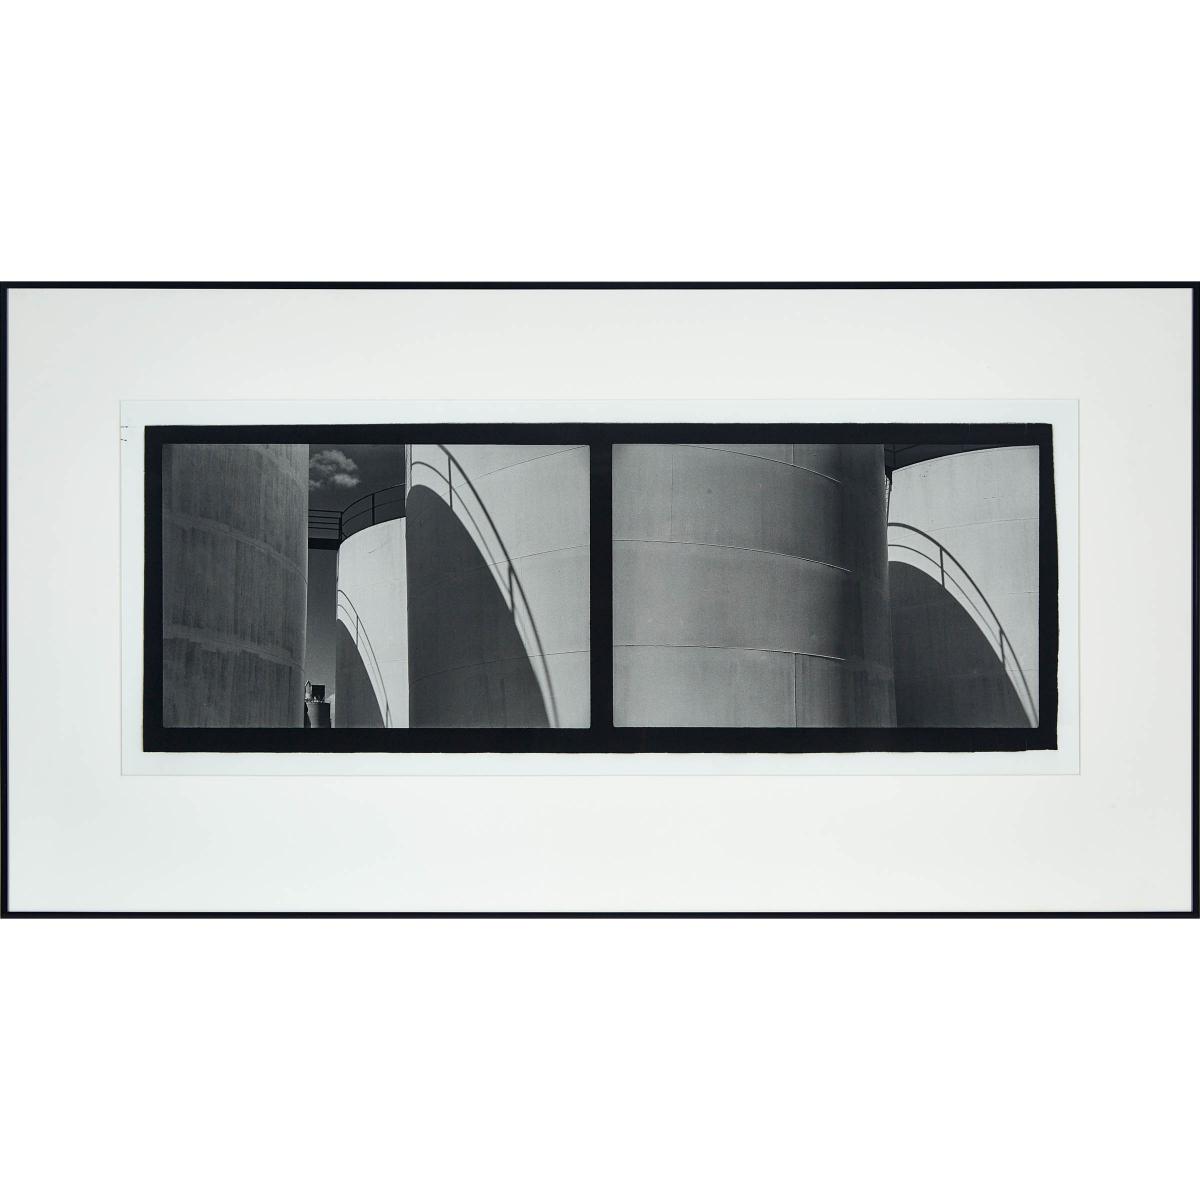 Jane Hinton (Stevenson) (1936-2020), TANKS, 1991, Gelatin silver print; titled and dated "Tanks, 199 - Image 2 of 3